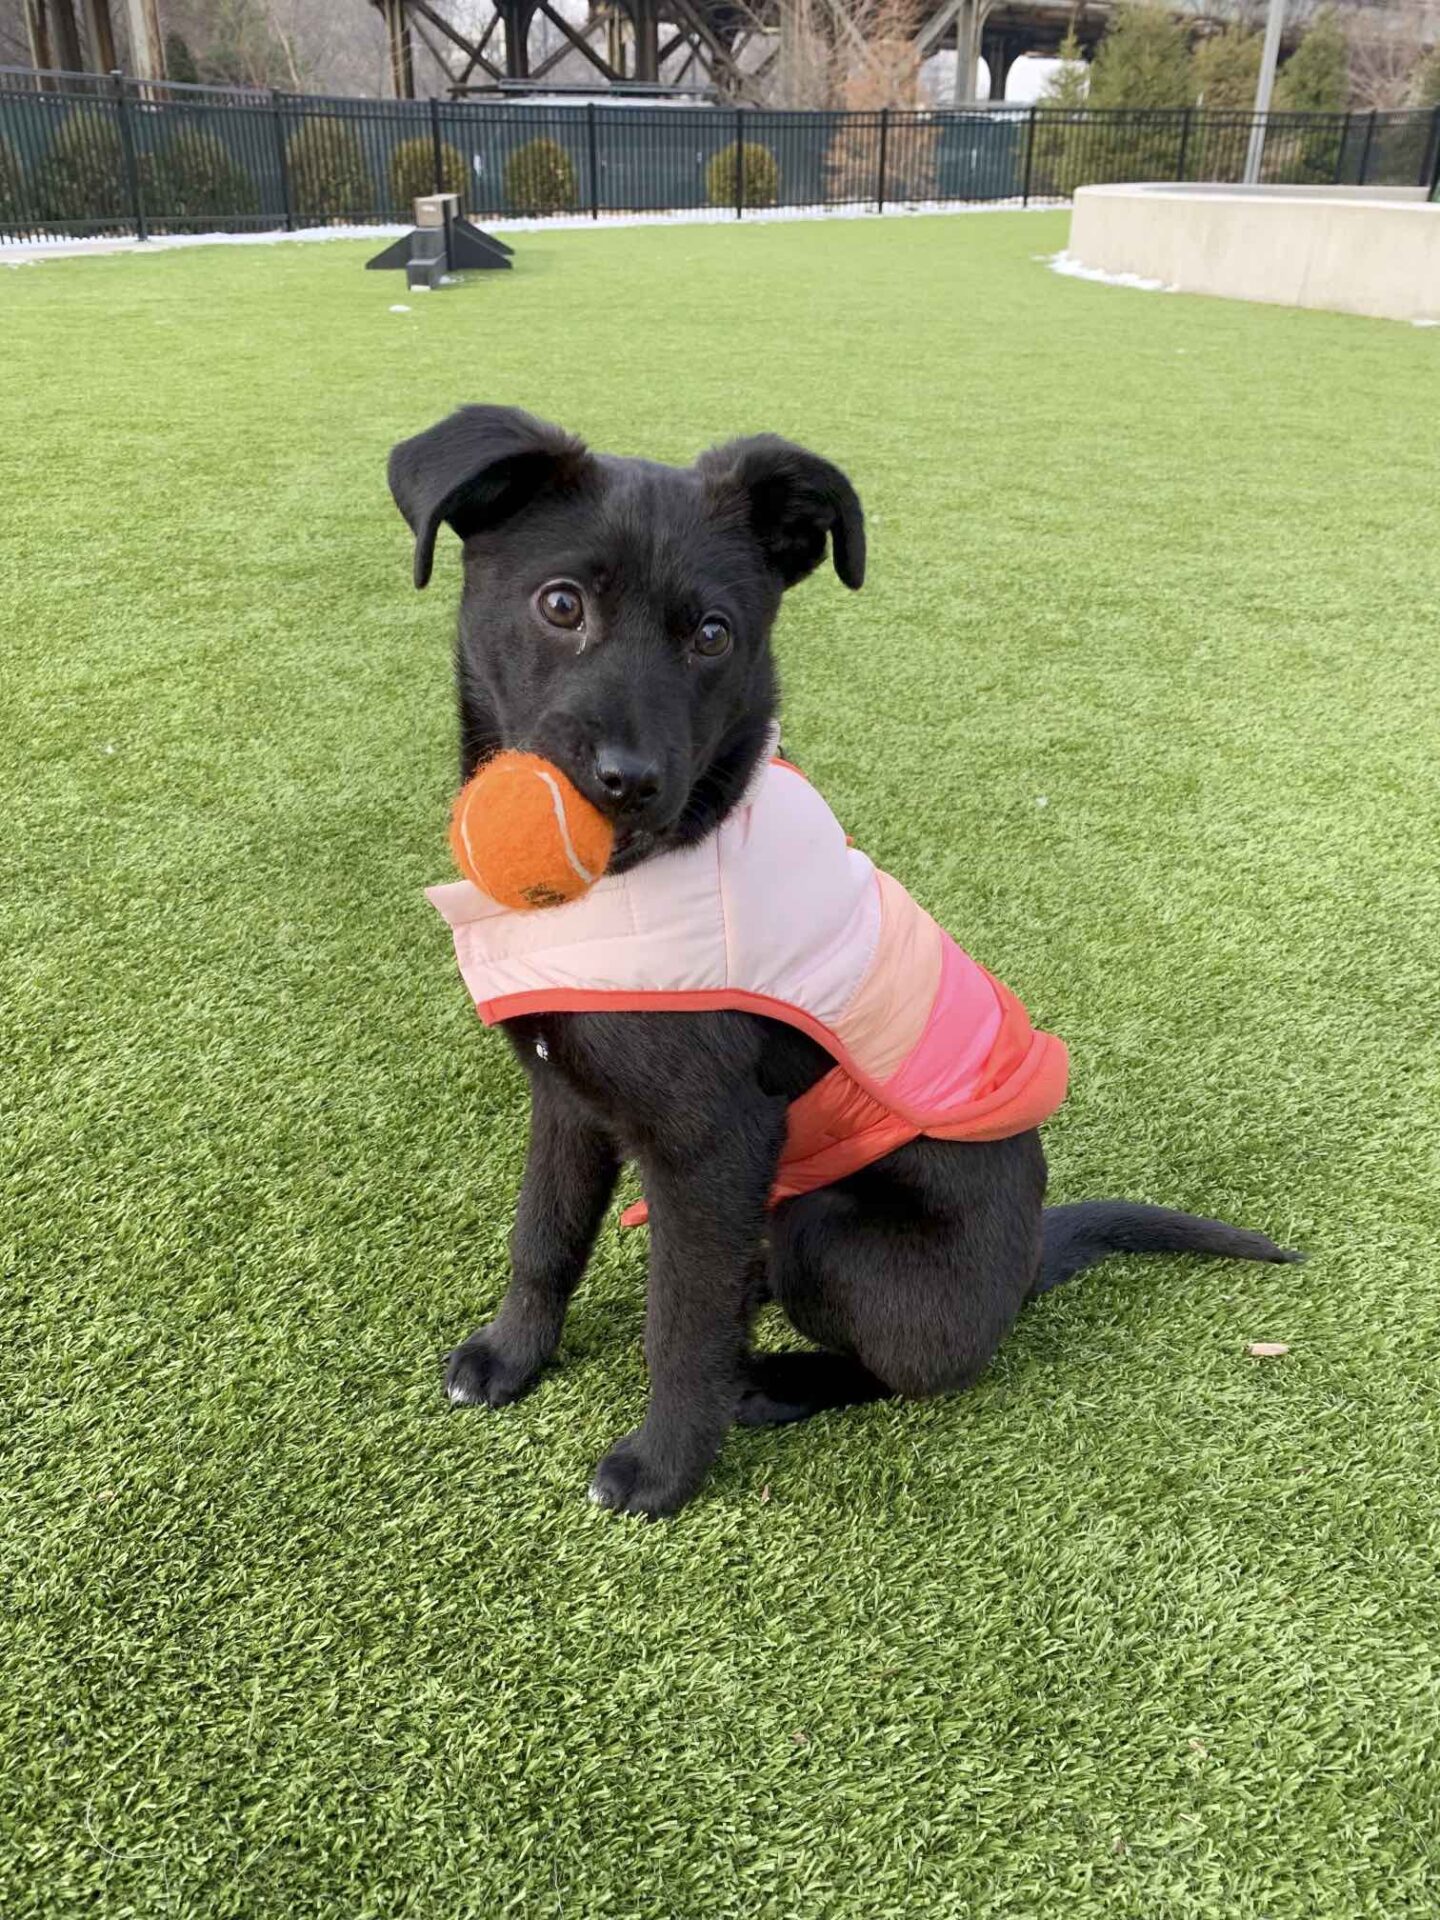 A black puppy wearing a pink vest holds a tennis ball in its mouth, sitting on artificial grass, with a fence and trees in the background.